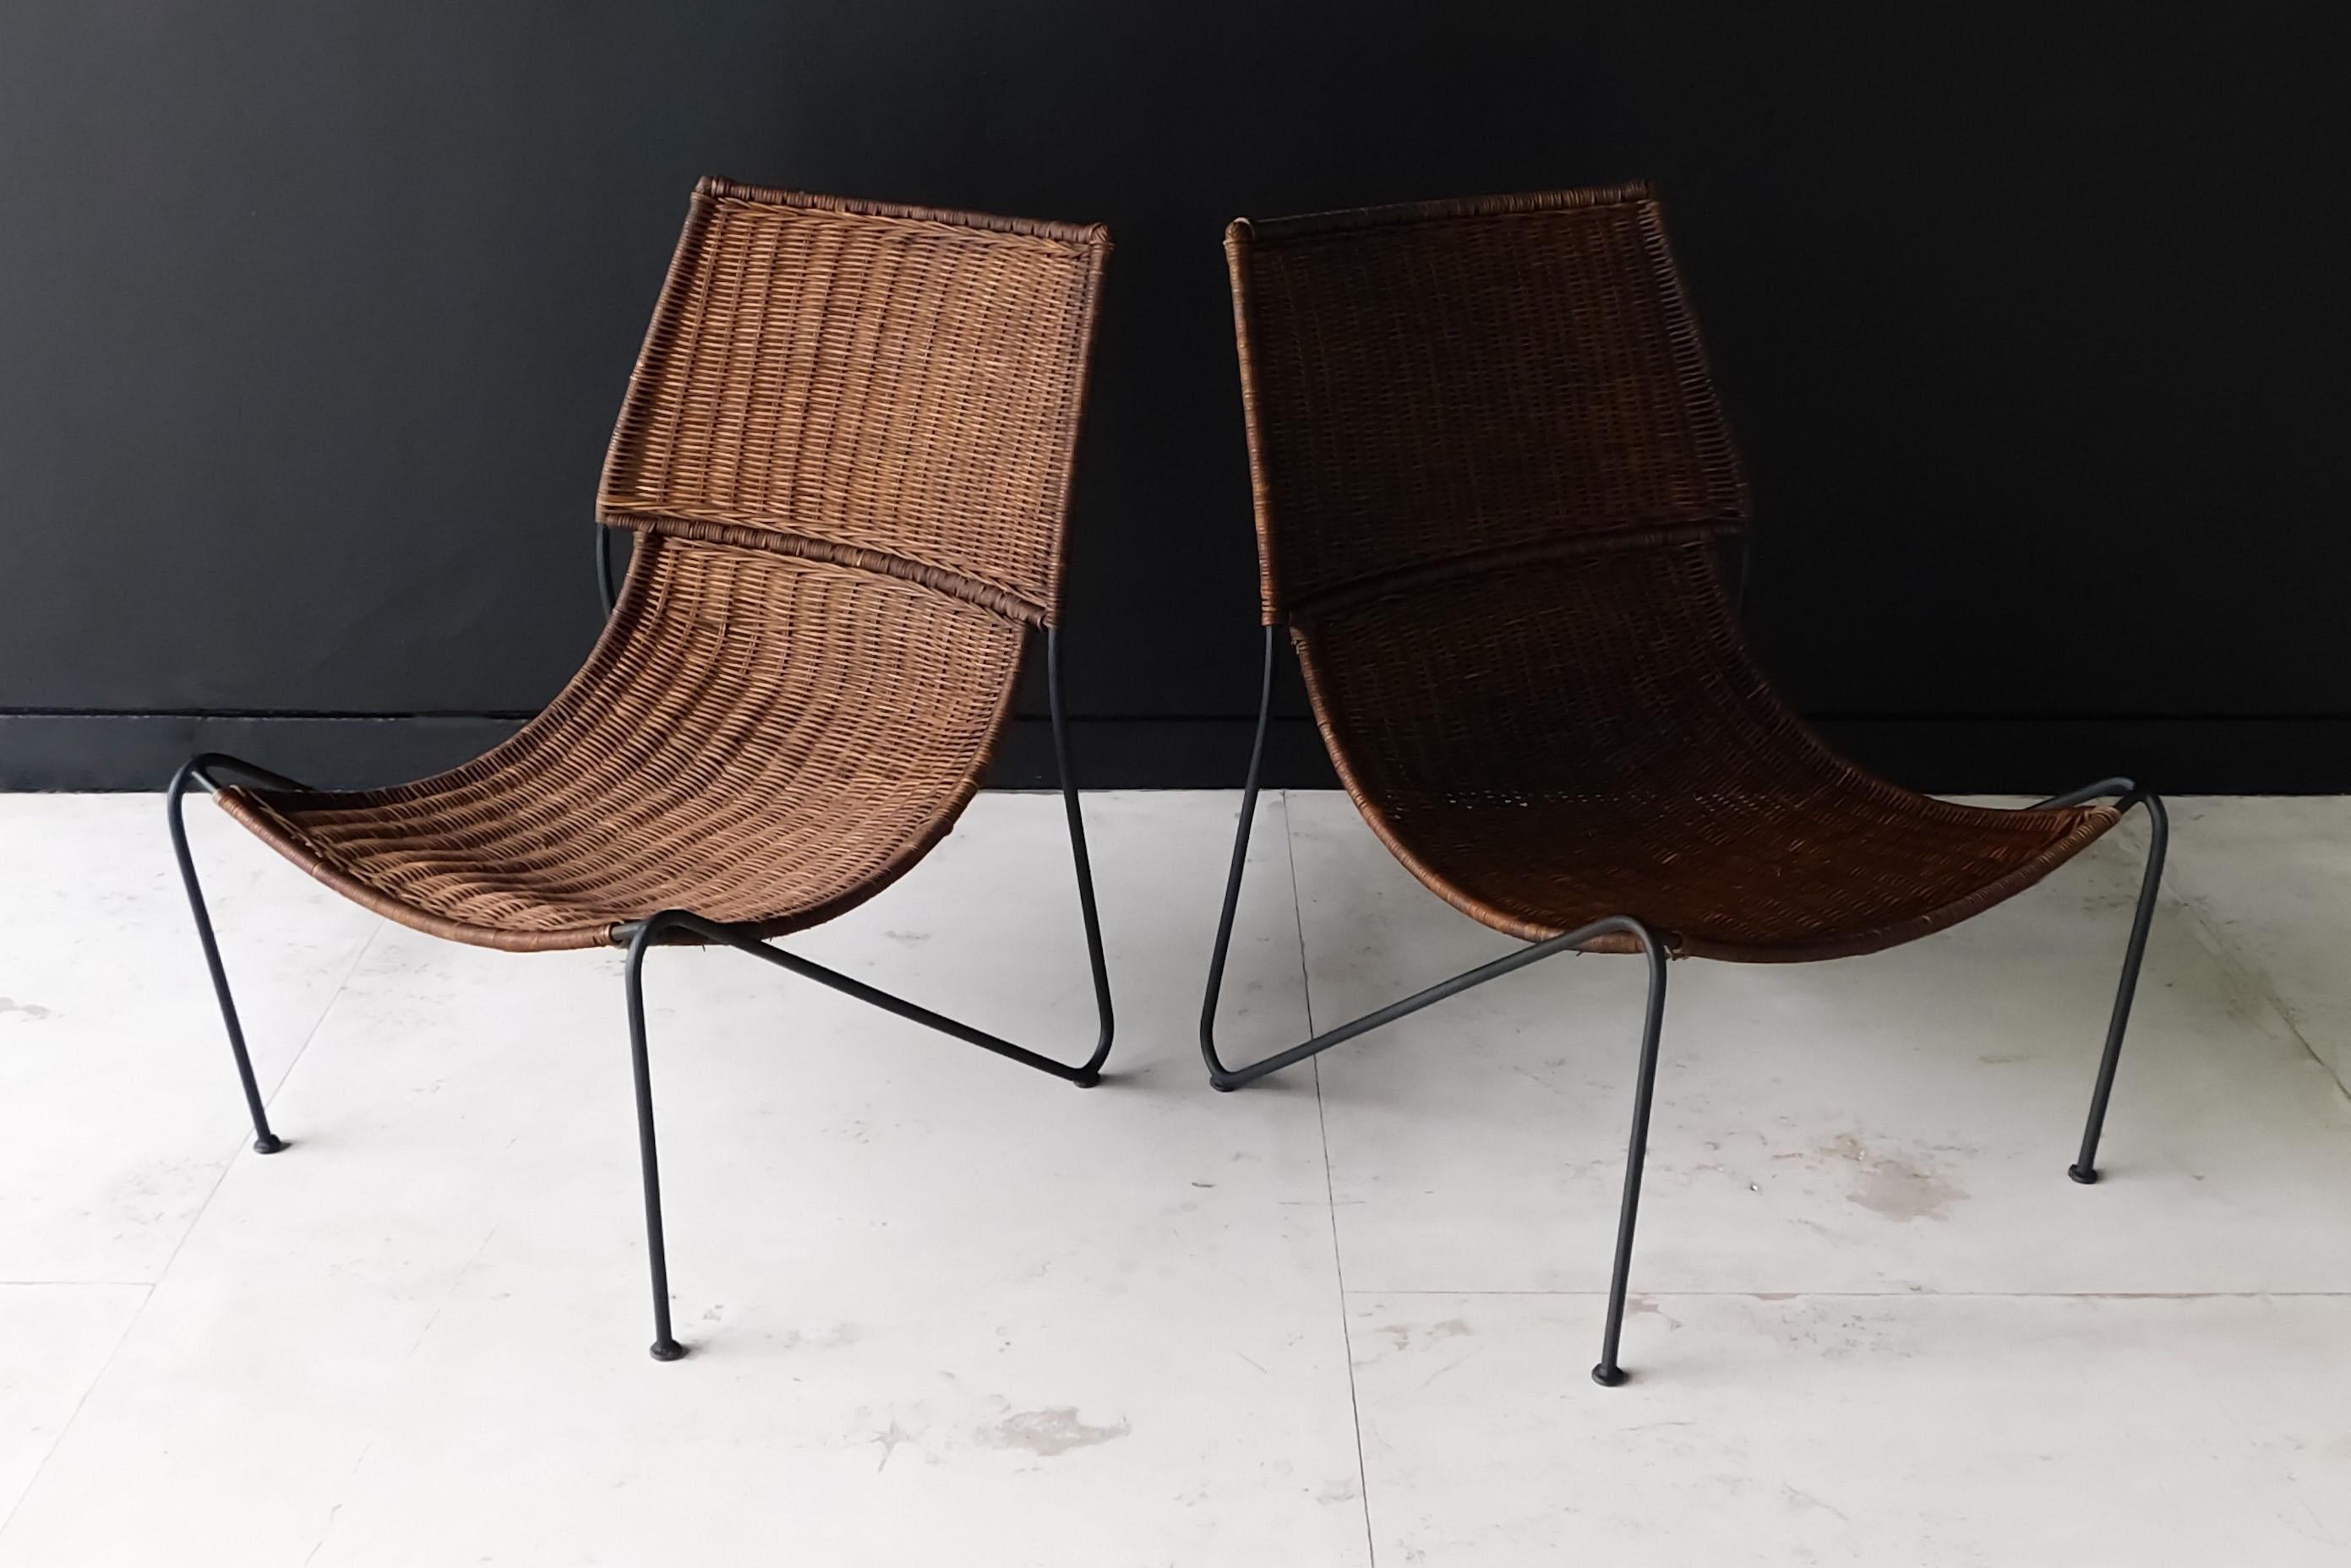 Pair of iron and woven cane Mexican modern chairs, 1960.